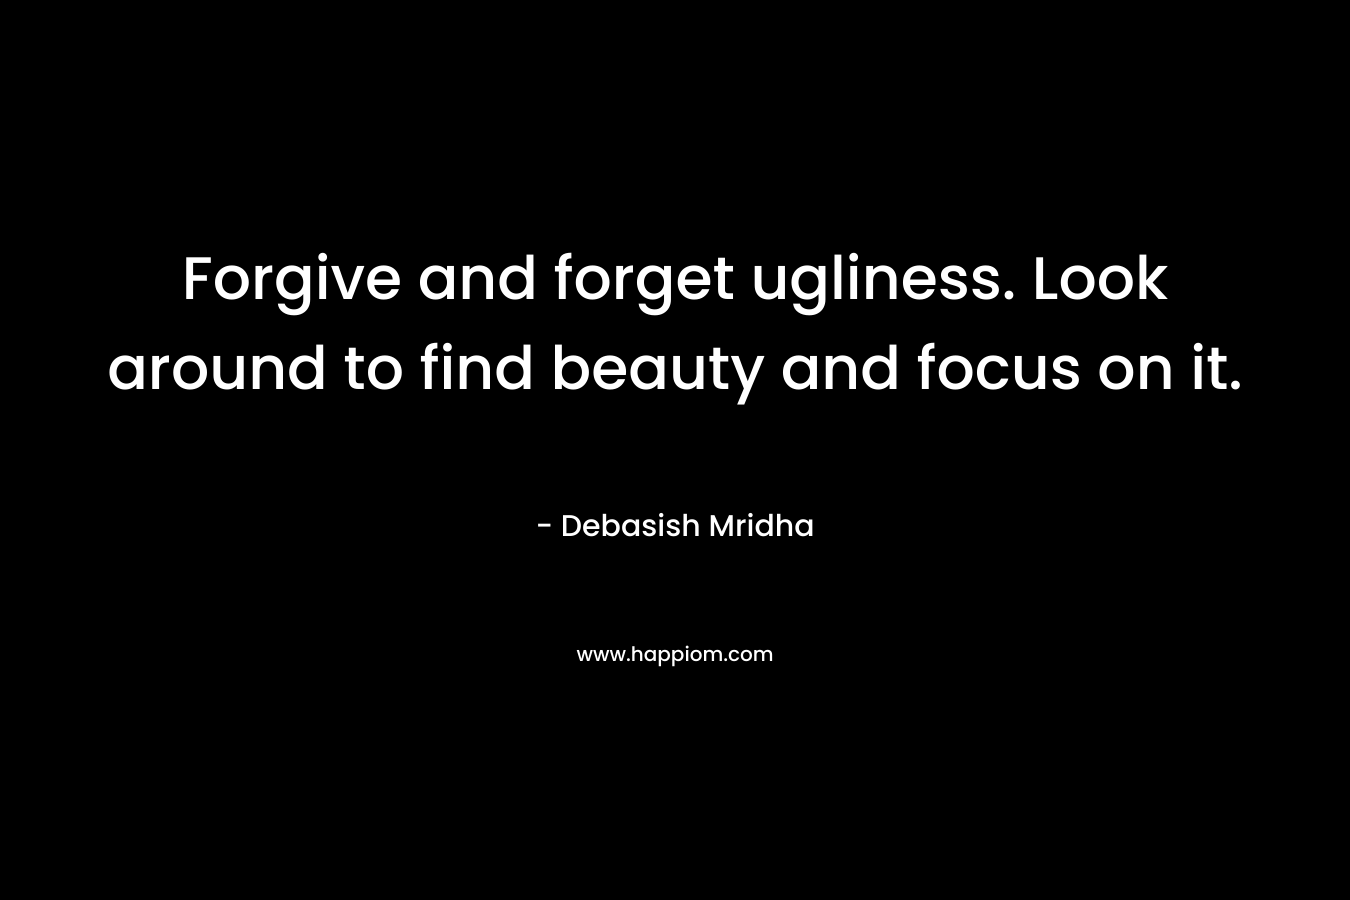 Forgive and forget ugliness. Look around to find beauty and focus on it.